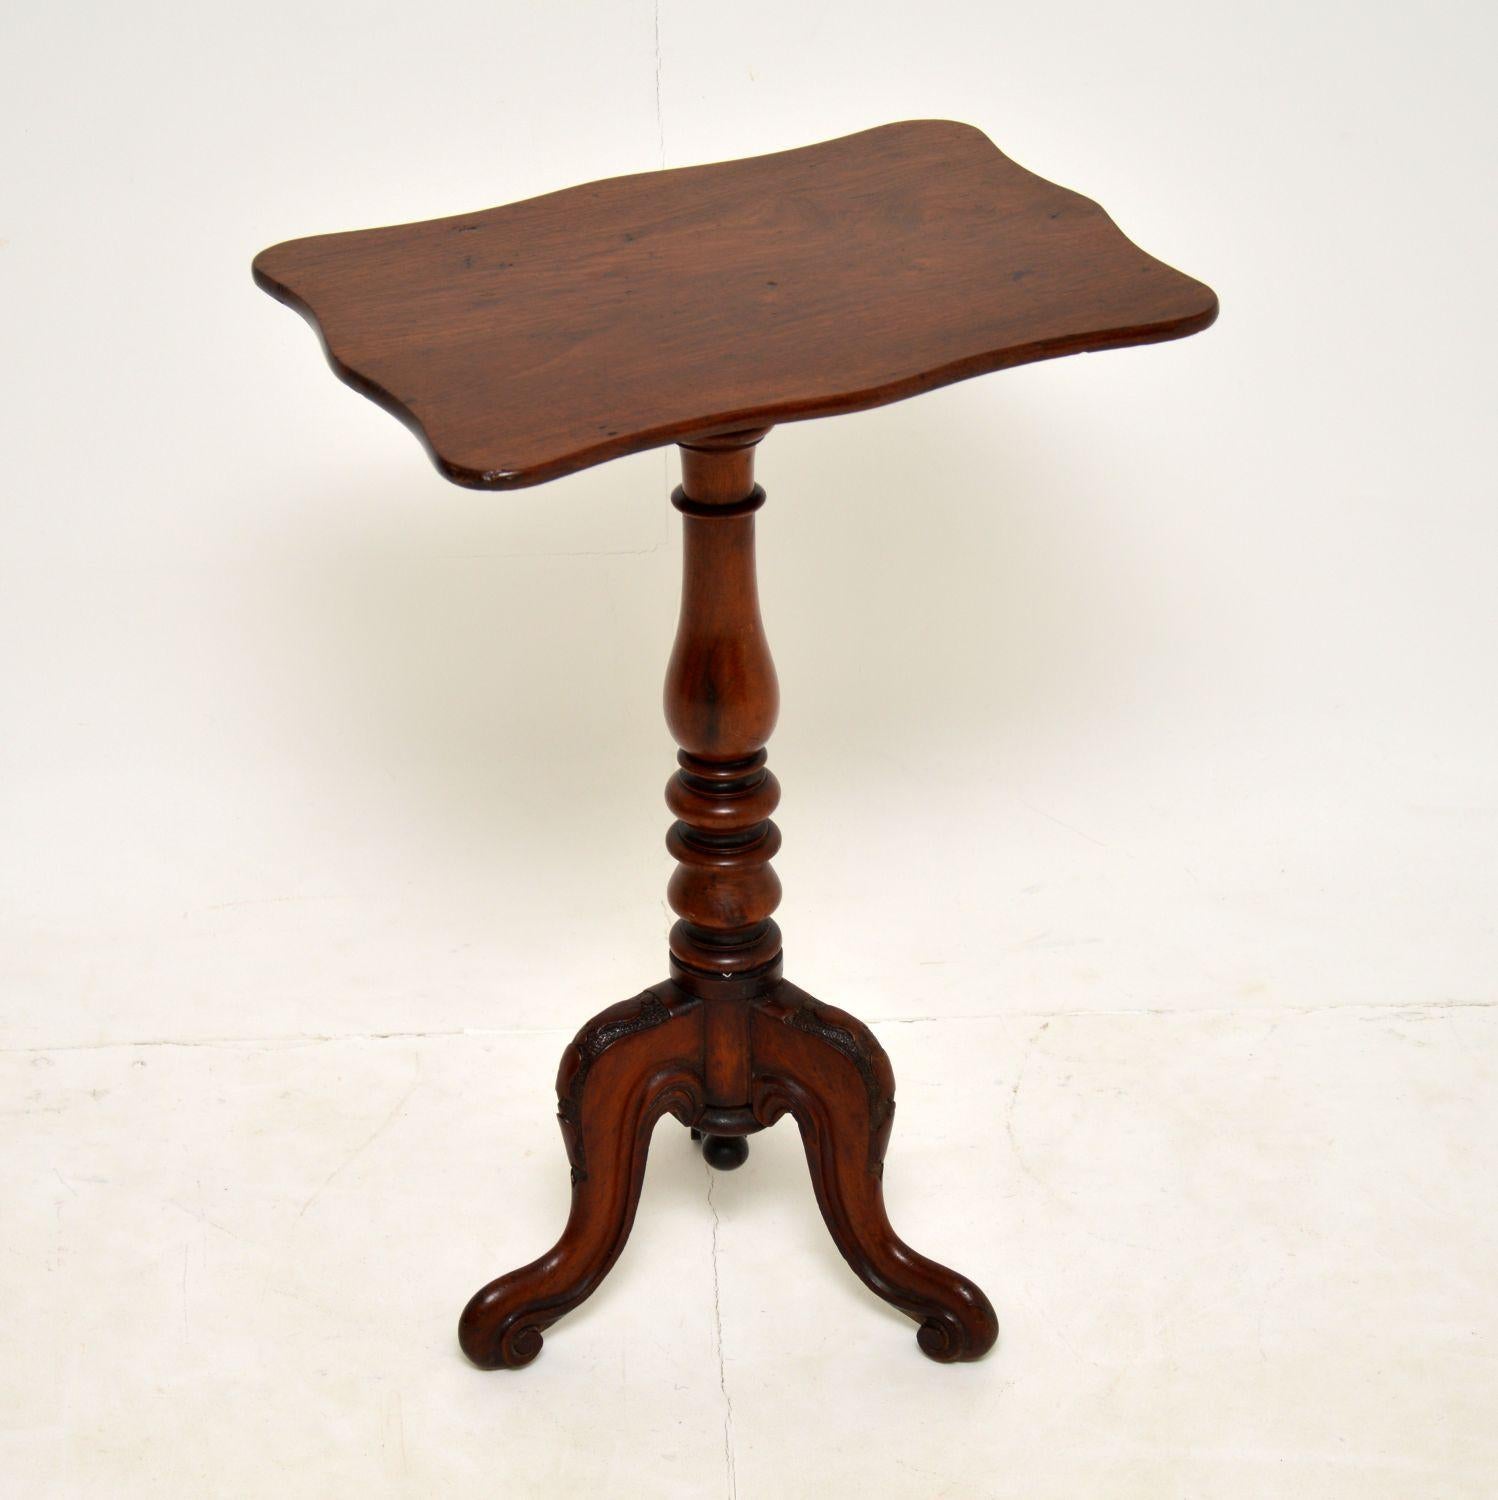 A lovely and very rare model, this antique mahogany side table is from the early Victorian period & was made in England, around the 1840-50’s period.

This is beautifully made from solid mahogany. It has a wonderfully carved tripod base, and an